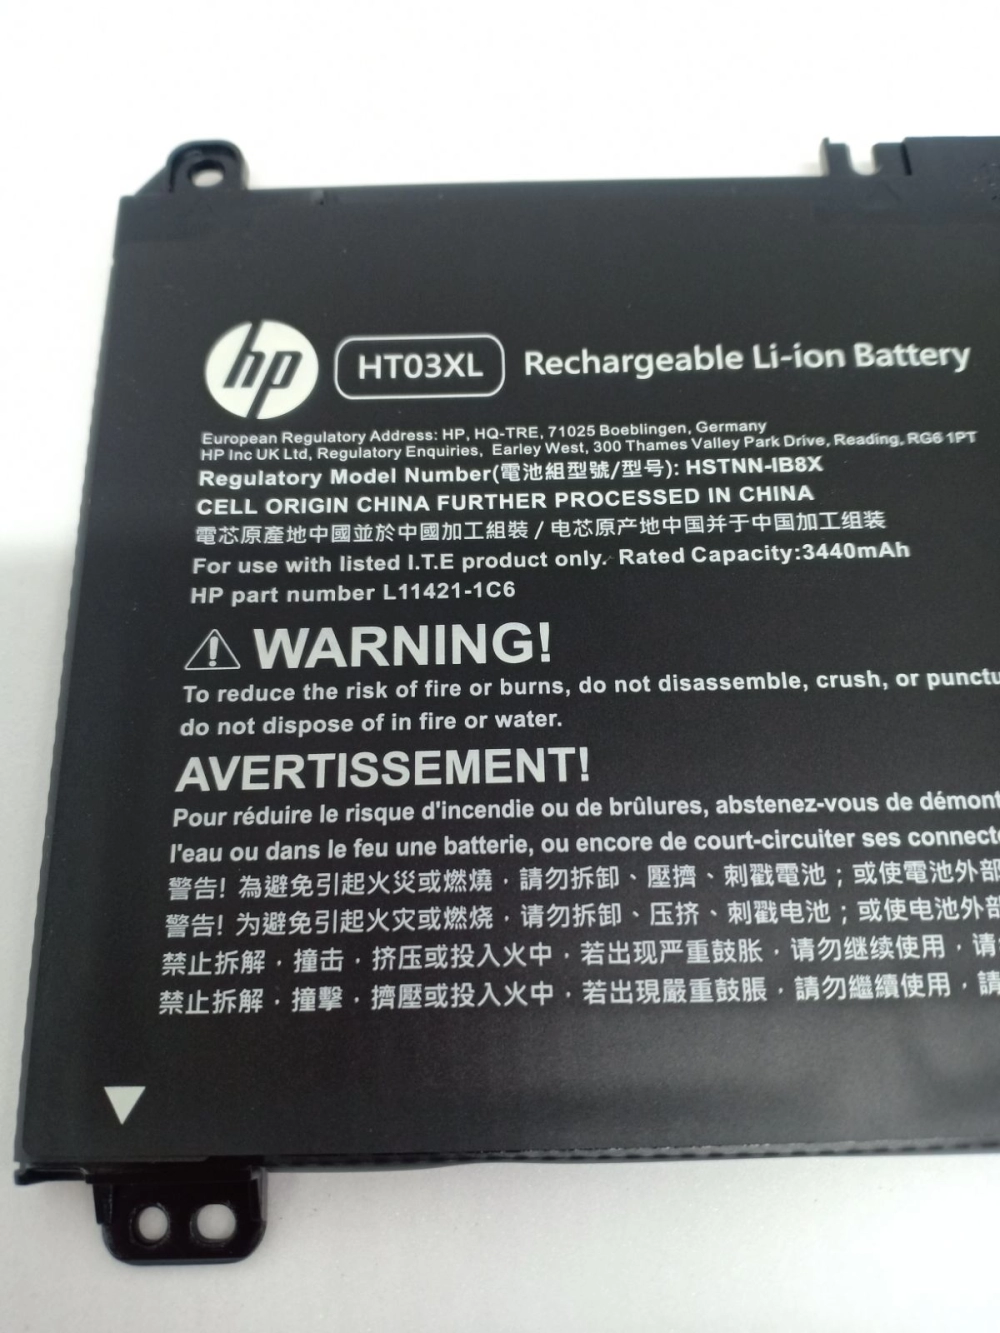 L11119-855 (HT03XL) HP Battery for HP Pavilion 14 15 X360